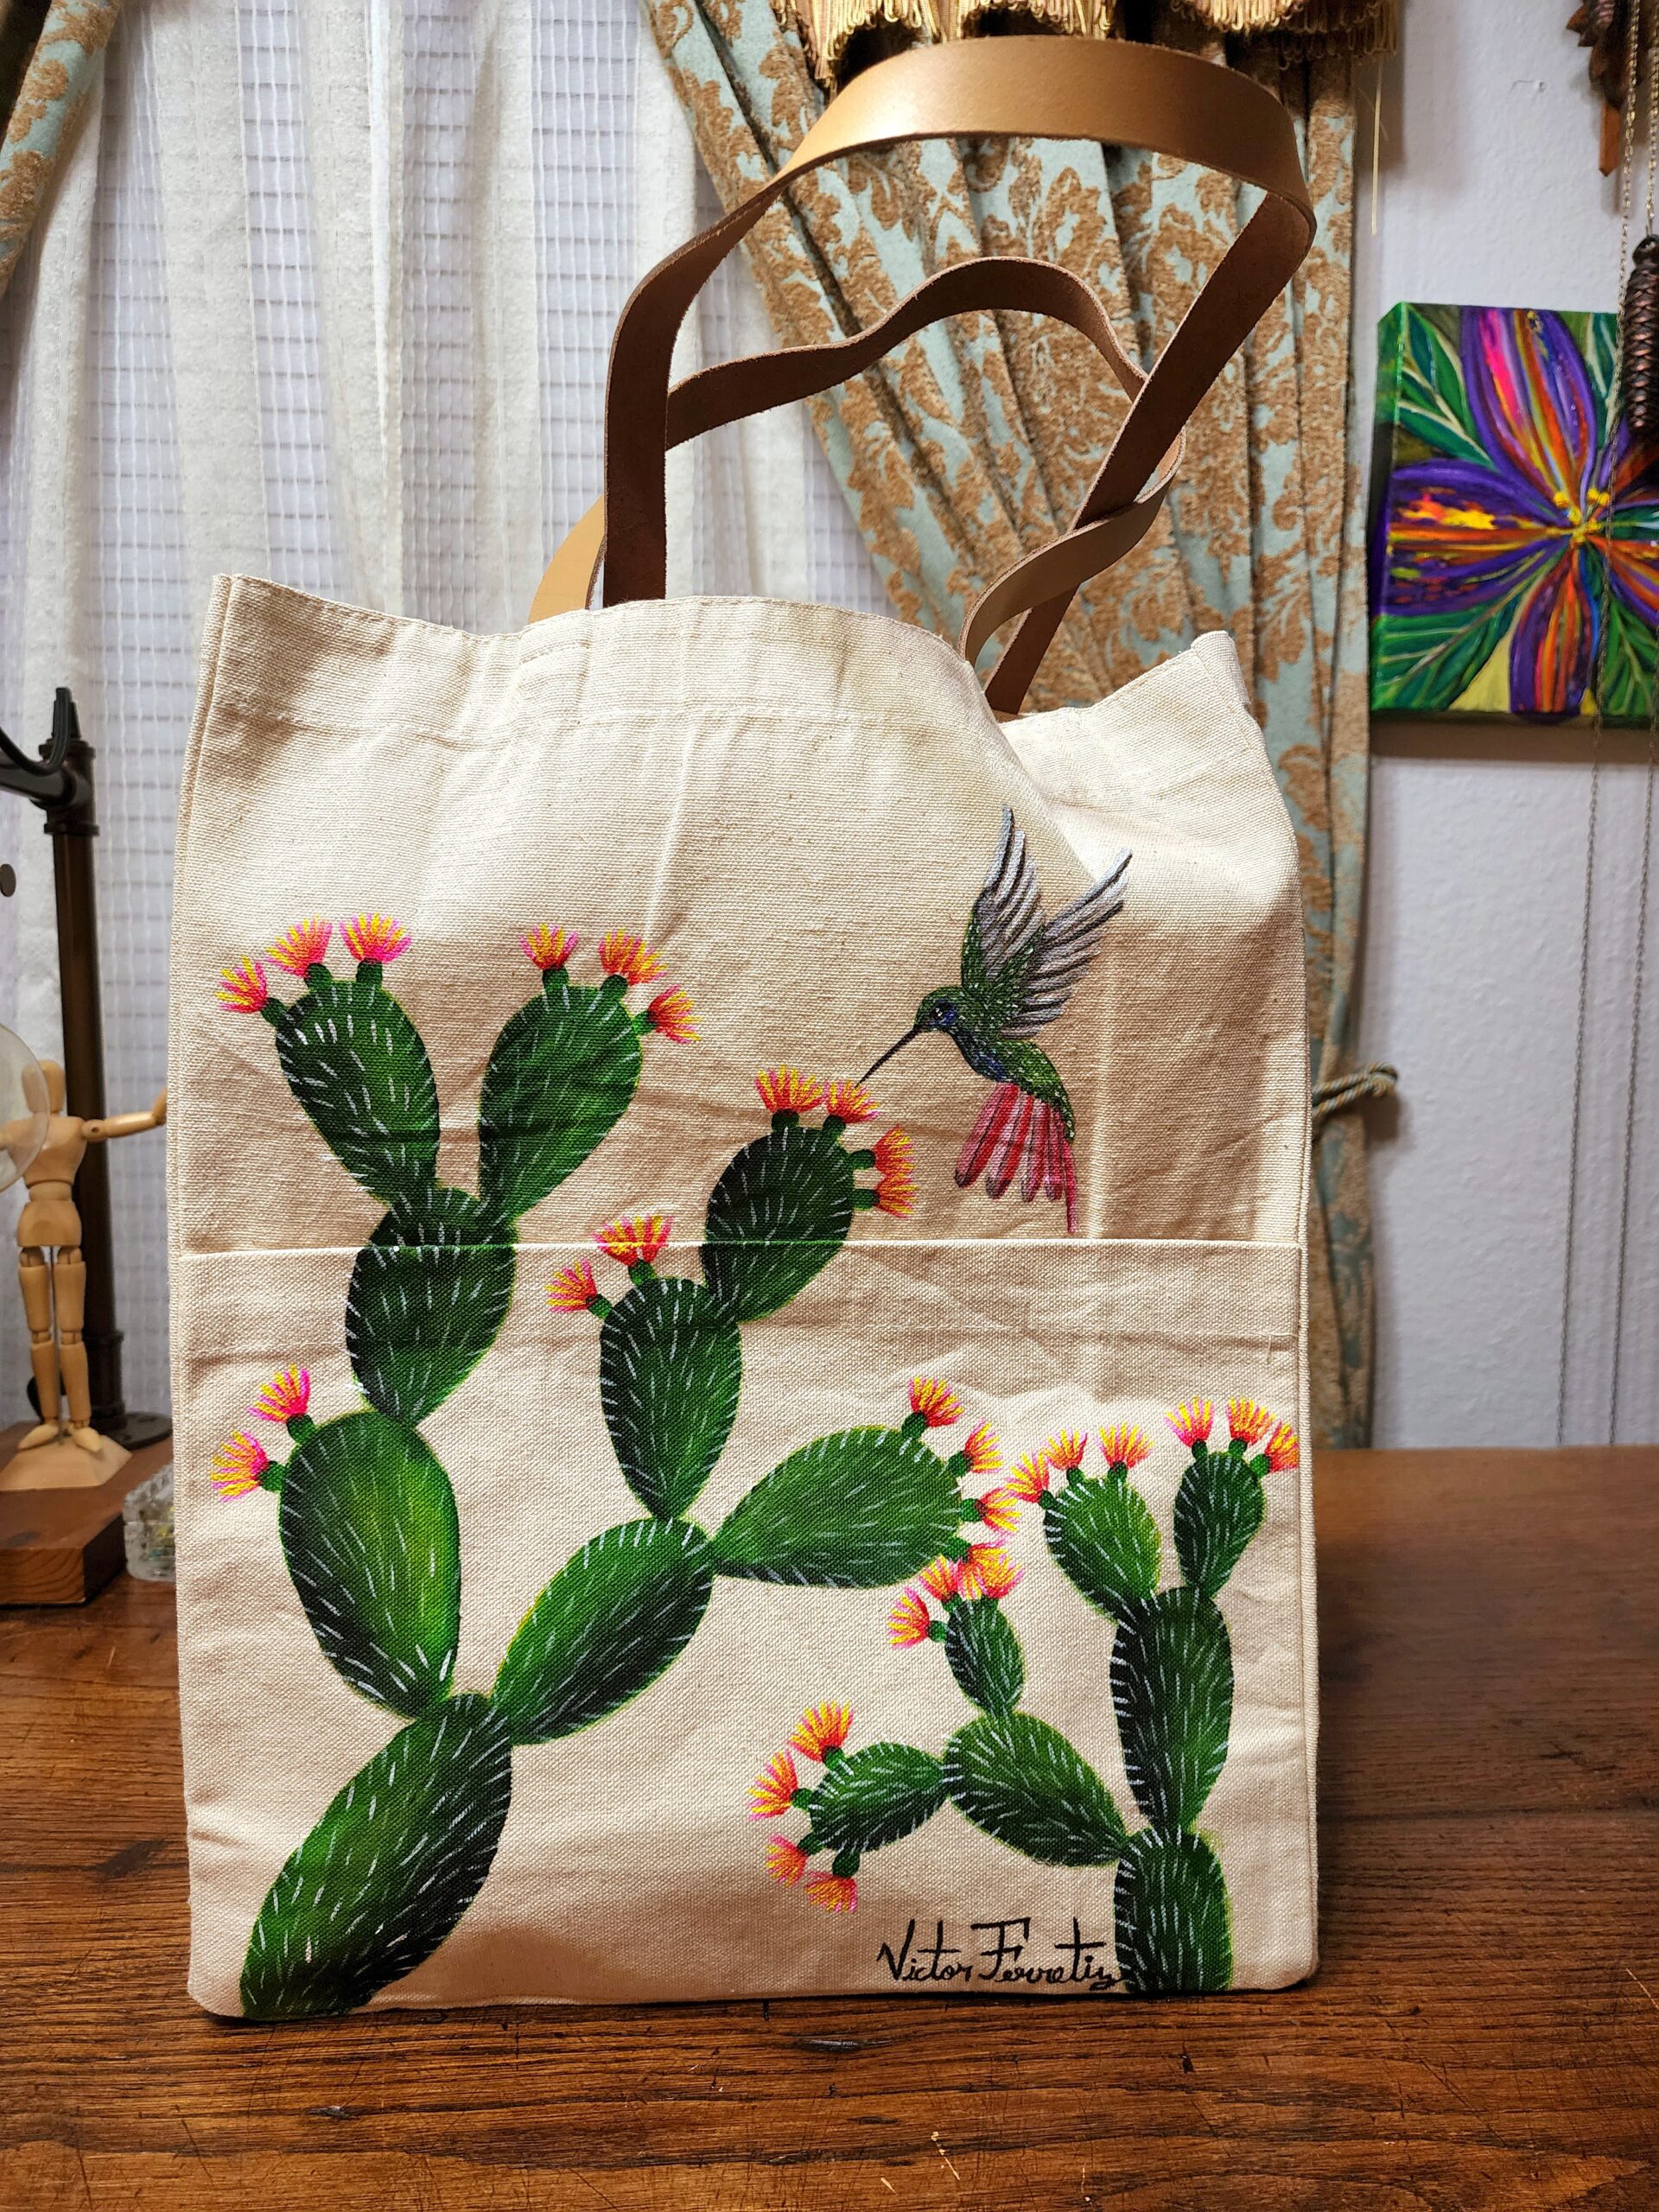 Original hand-painted tote bag with a front pocket and leather handles. Tote bag signed by the artist.